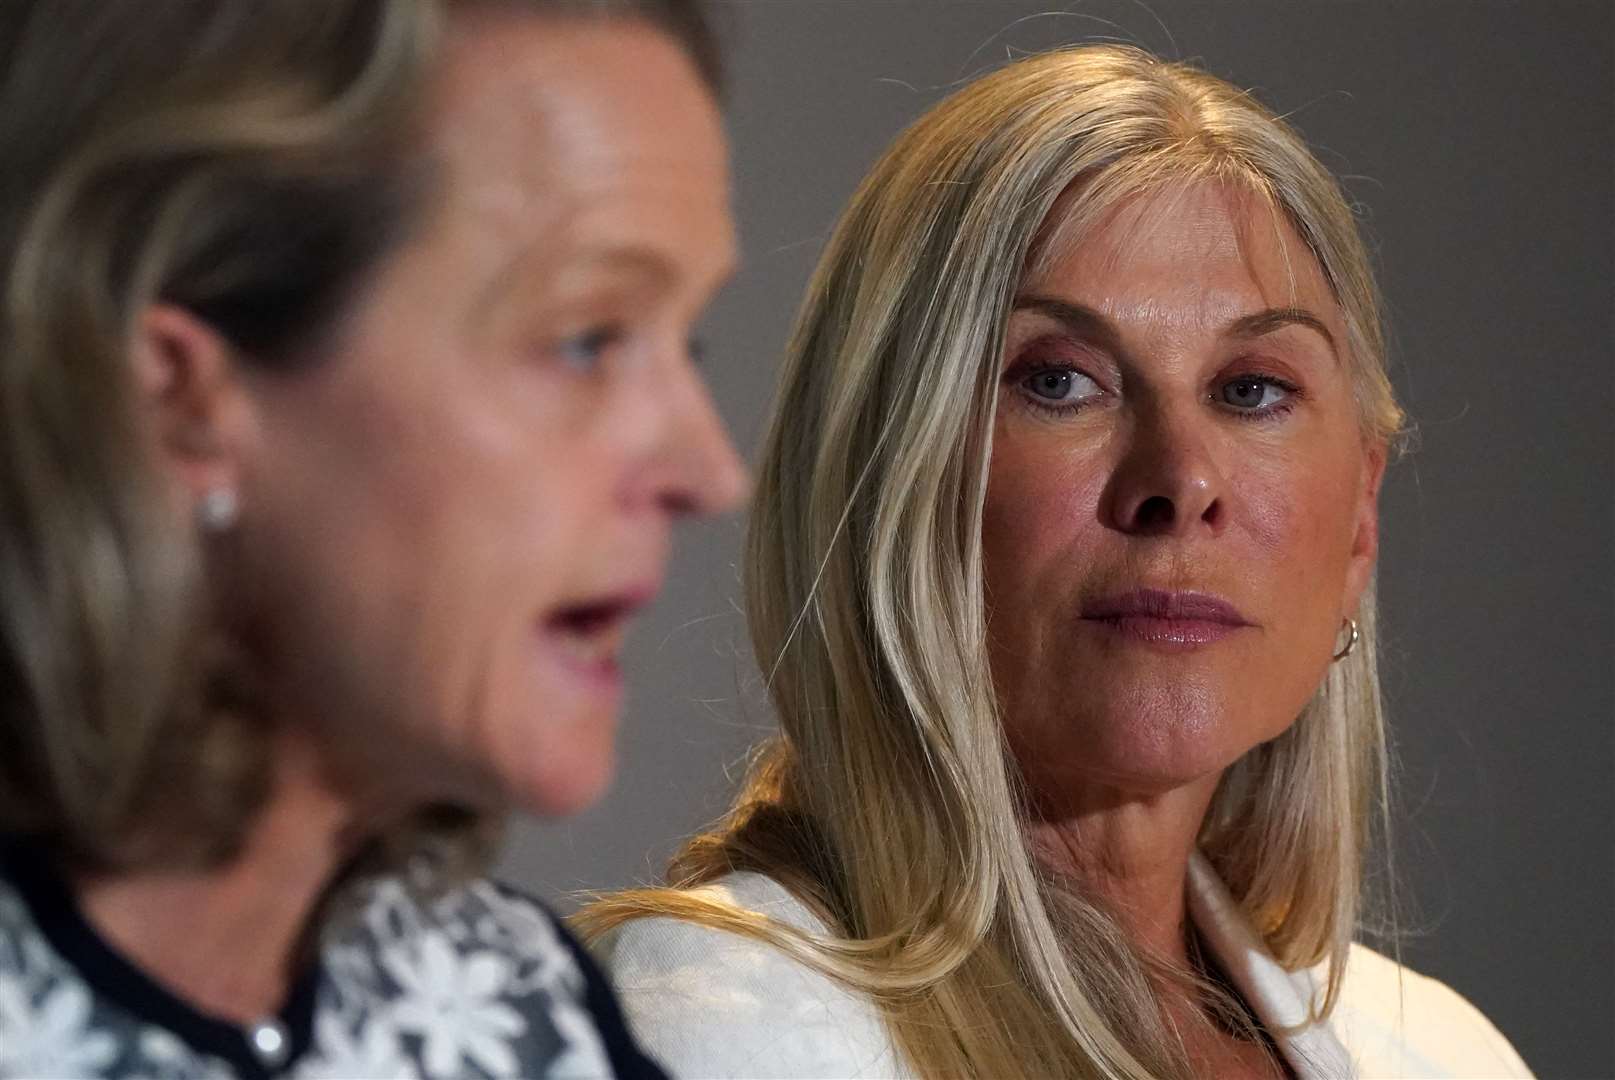 Sharron Davies and Mara Yamauchi said they were disappointed they were not invited to give evidence at Holyrood (Andrew Milligan/PA)